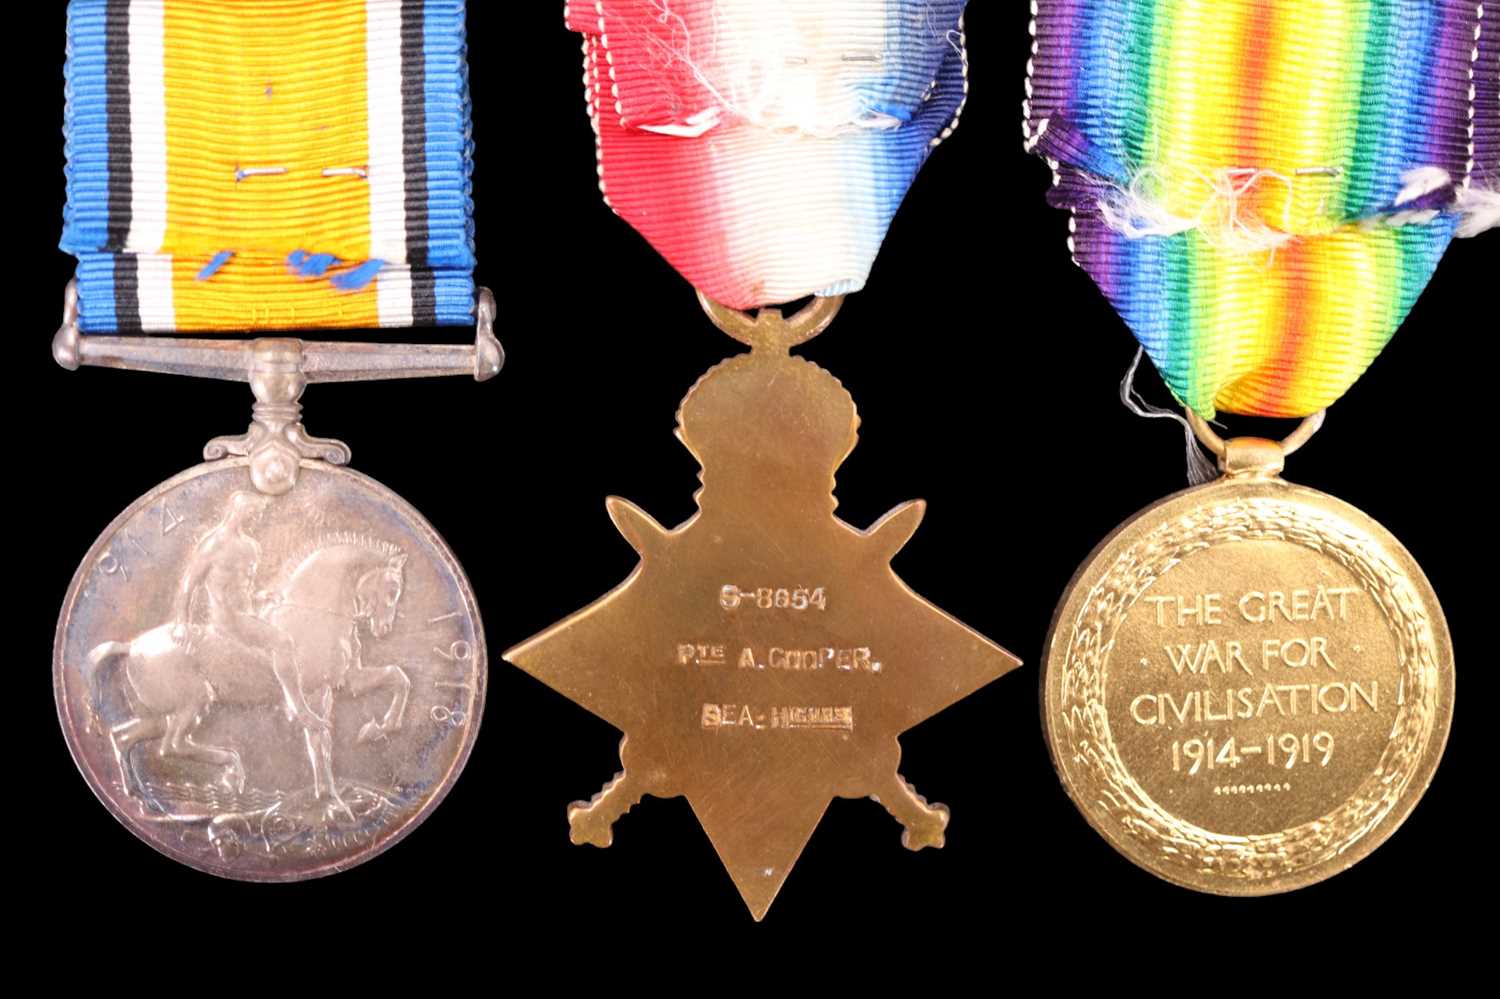 A 1914-15 Star, British War and Victory Medals with Memorial Plaque to S-8654 Pte Alfred Cooper, - Image 3 of 8